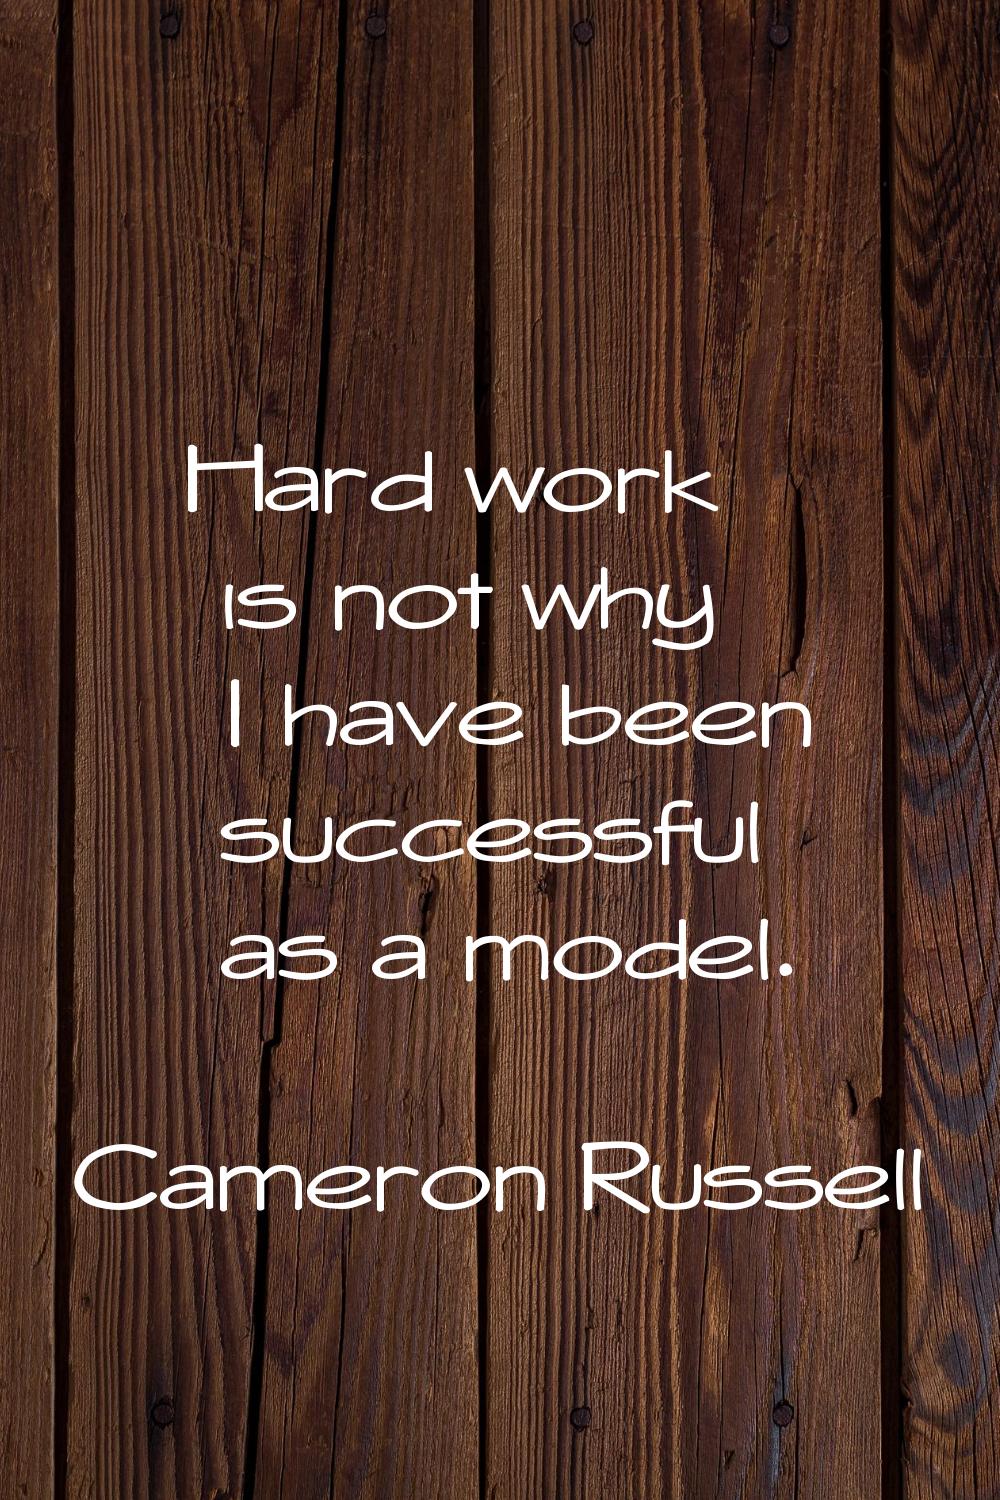 Hard work is not why I have been successful as a model.